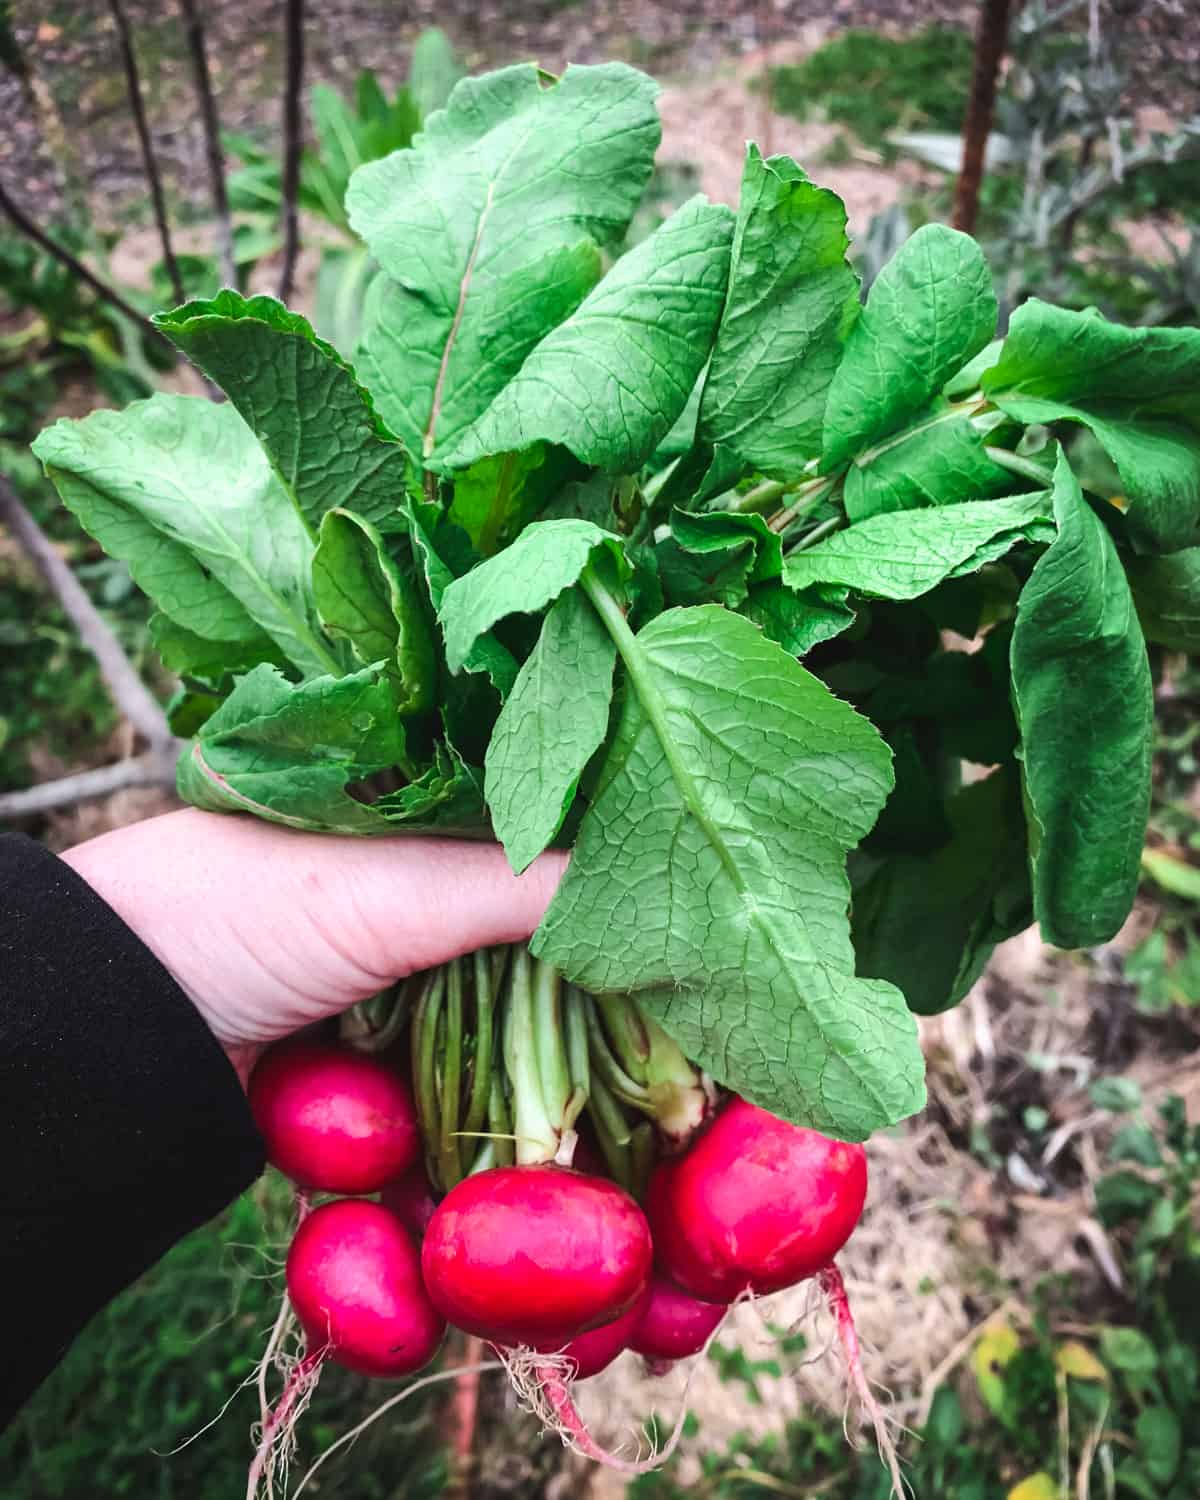 a hand holding a bunch of radishes with large radish leaves